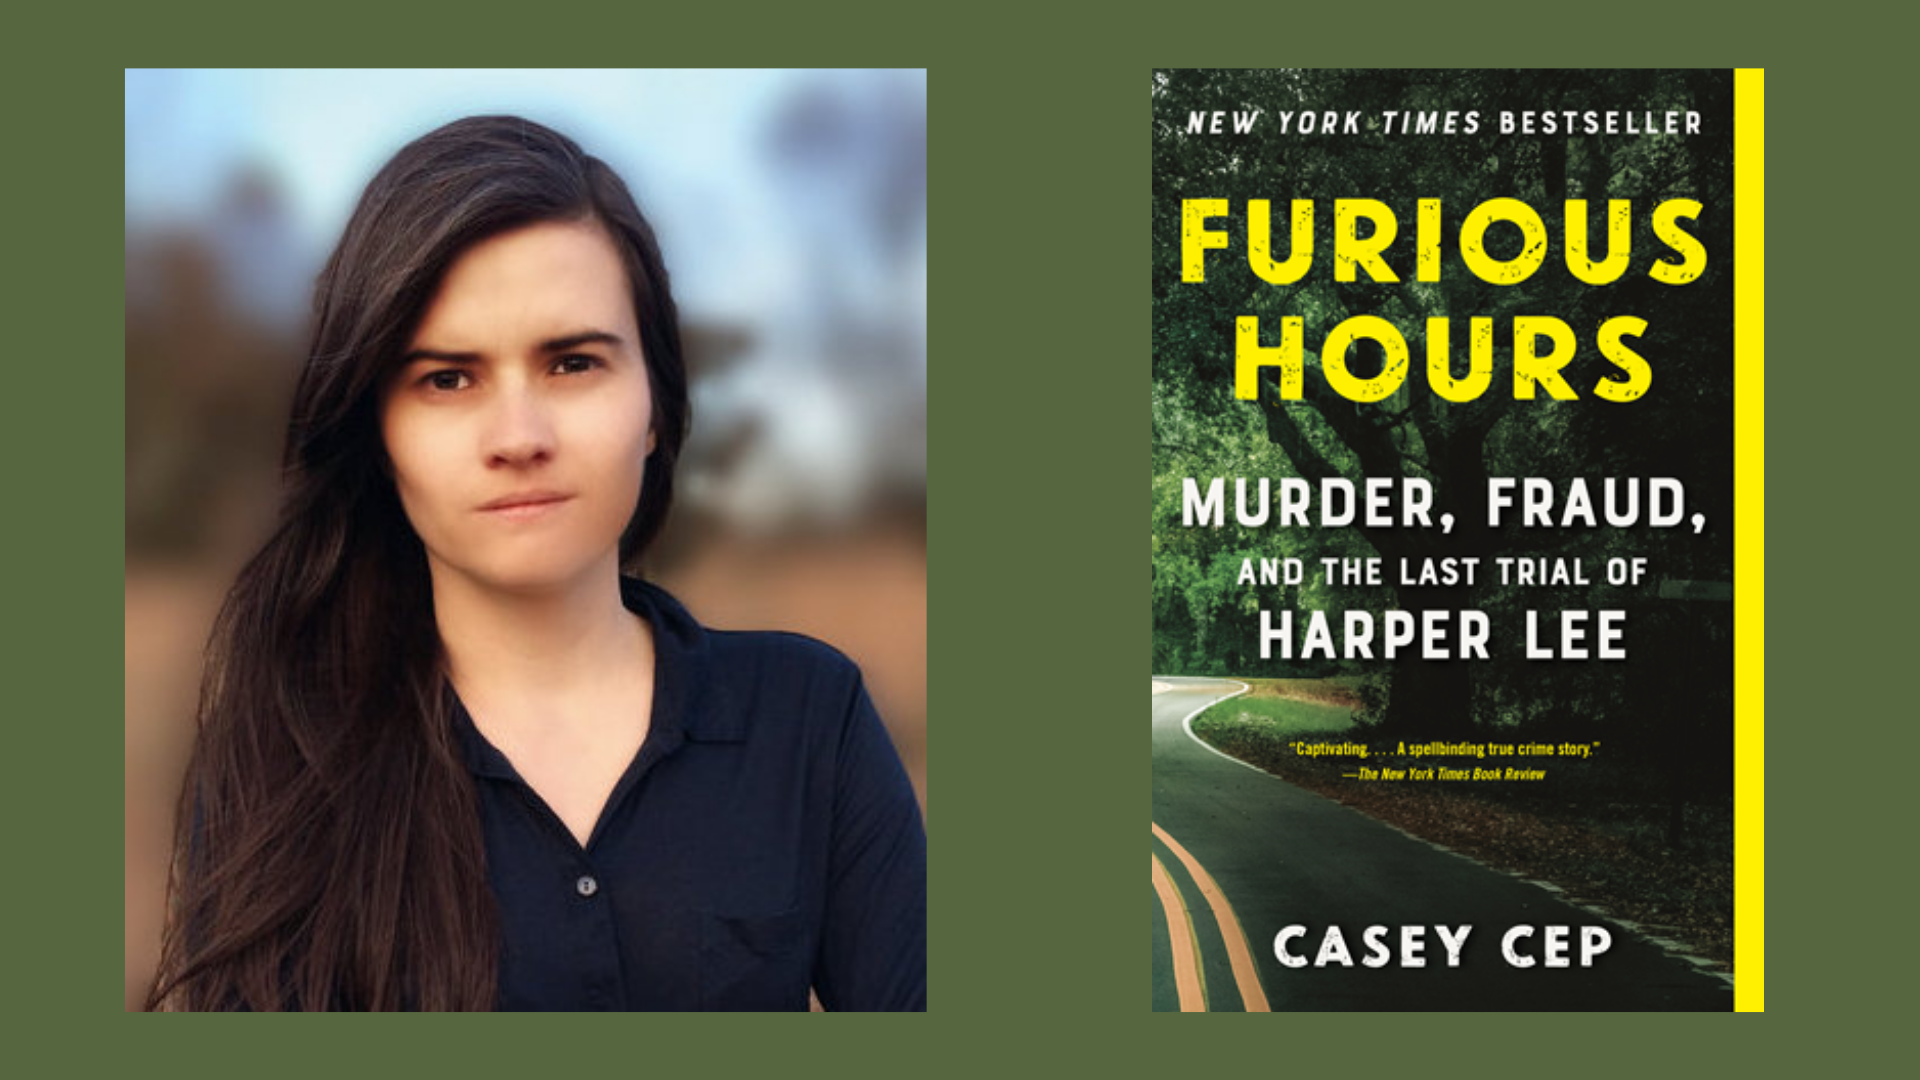 Photo of Casey Cep and book cover of Furious Hours